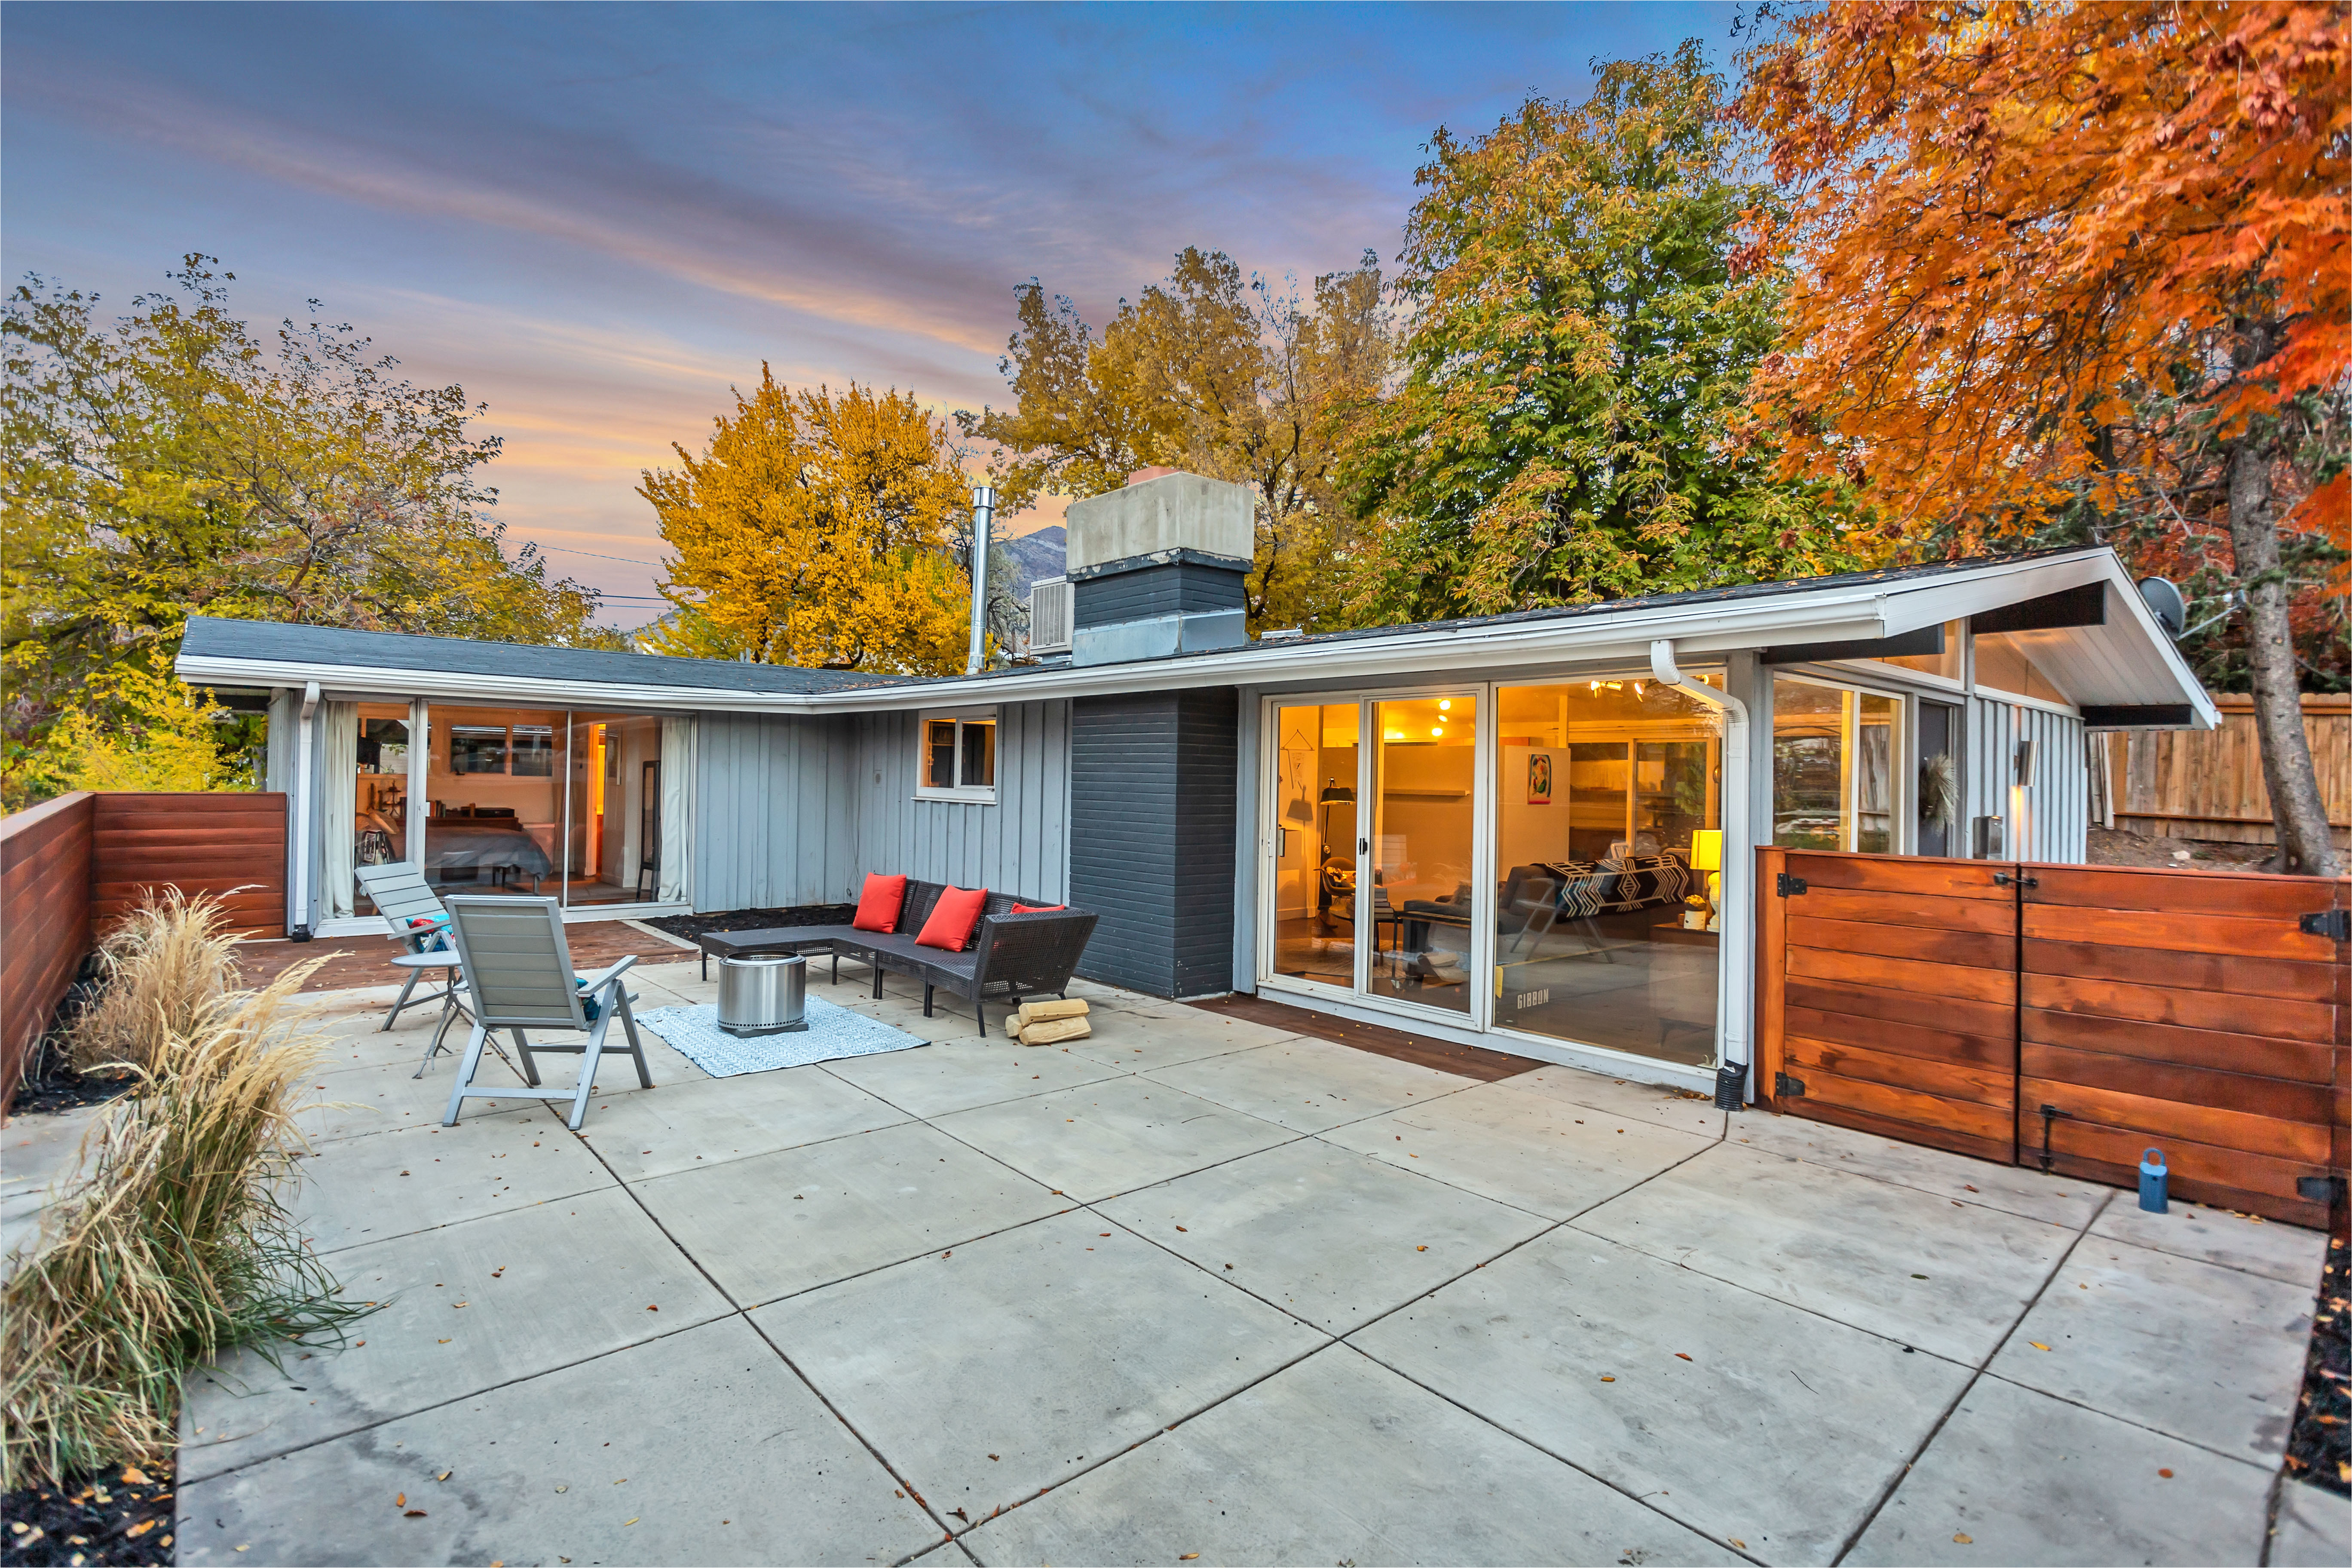 airy midcentury by cliff may wants 475k